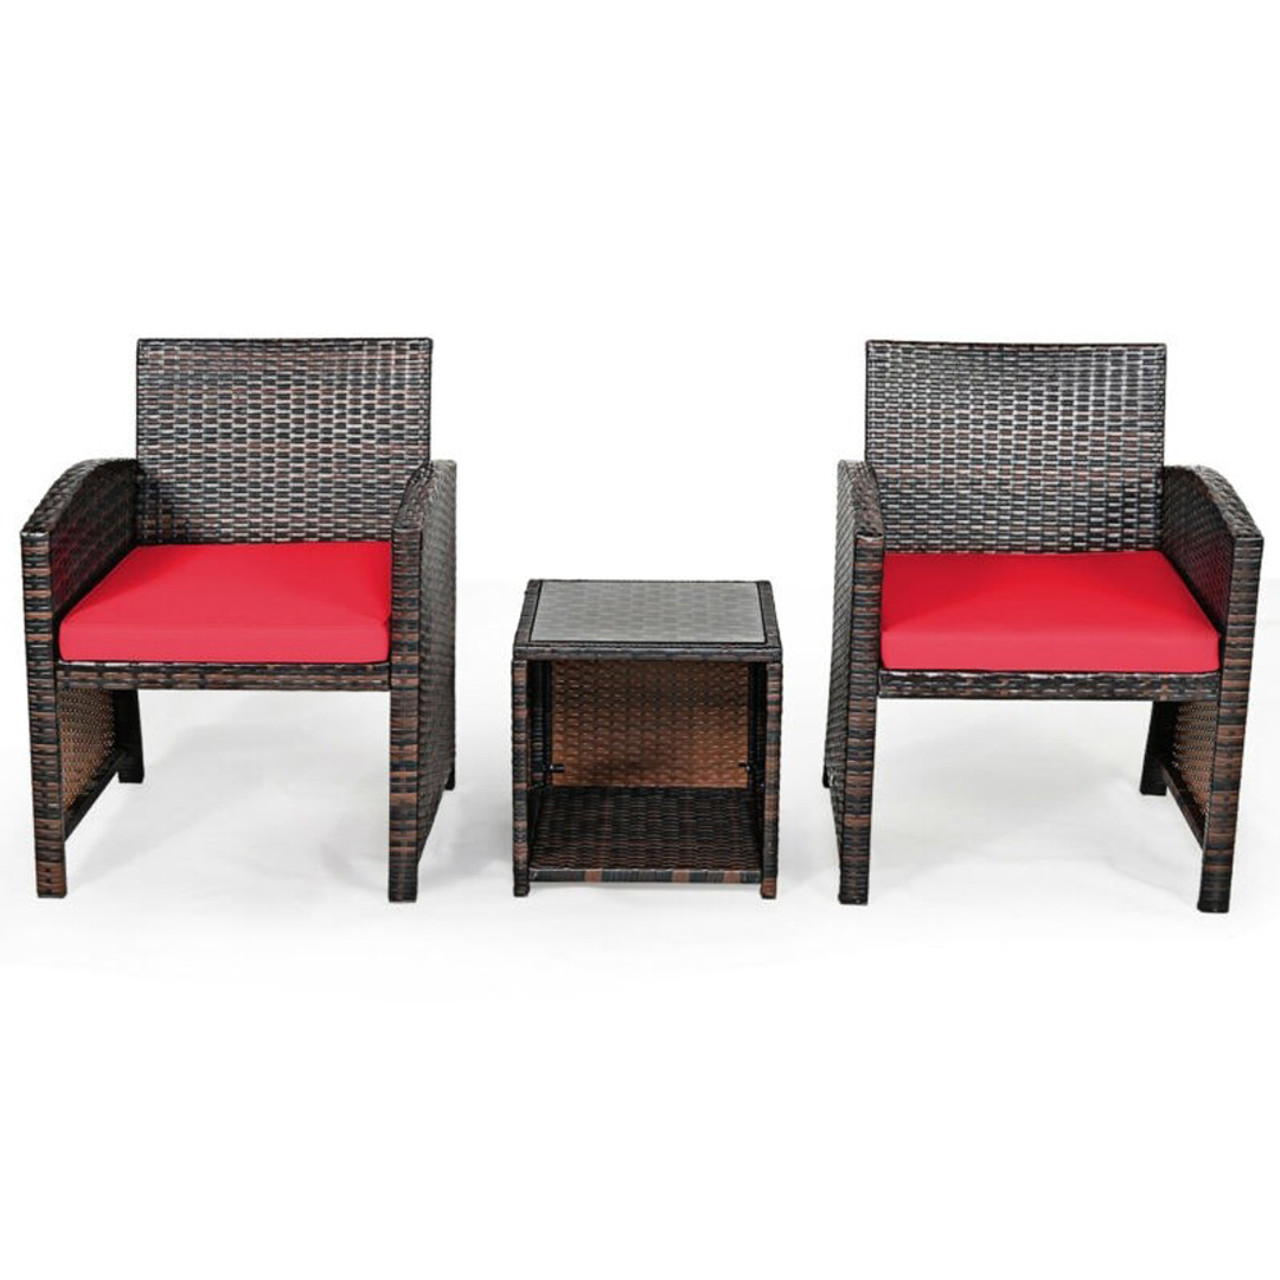 Rattan 3-Piece Outdoor Chairs and Table Set product image